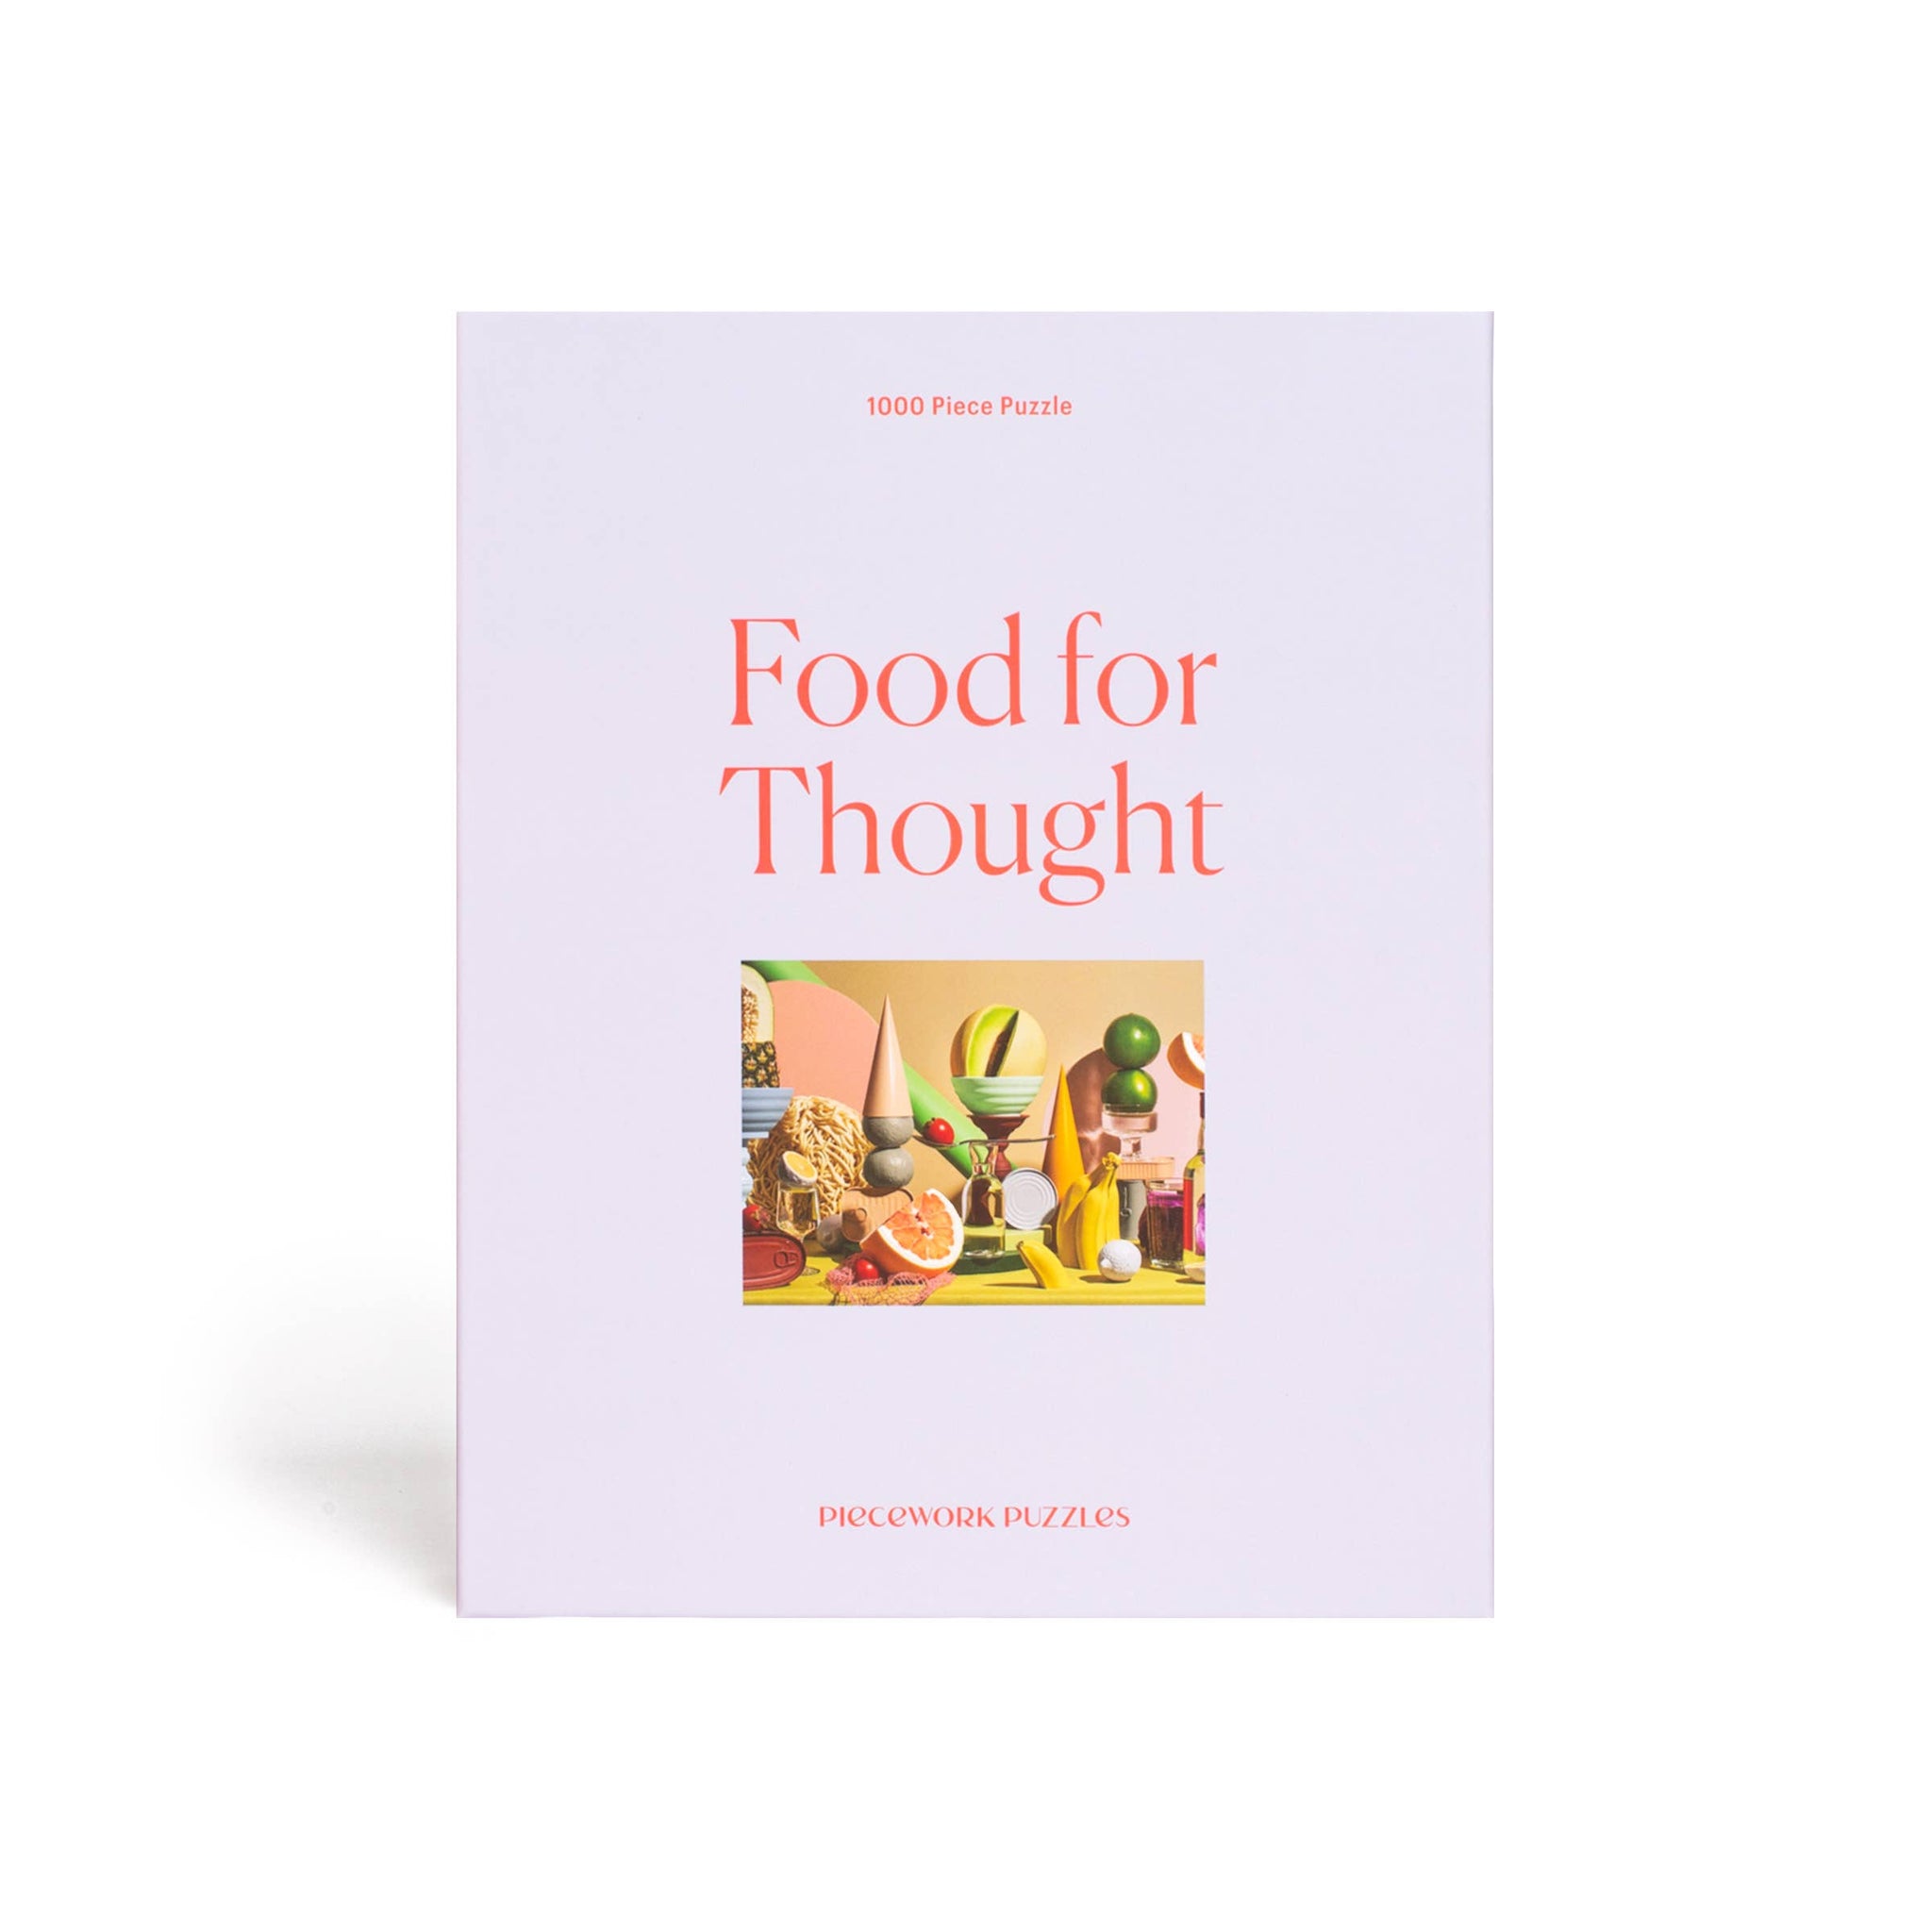 "Food for Thought" Puzzle - 1000 Piece